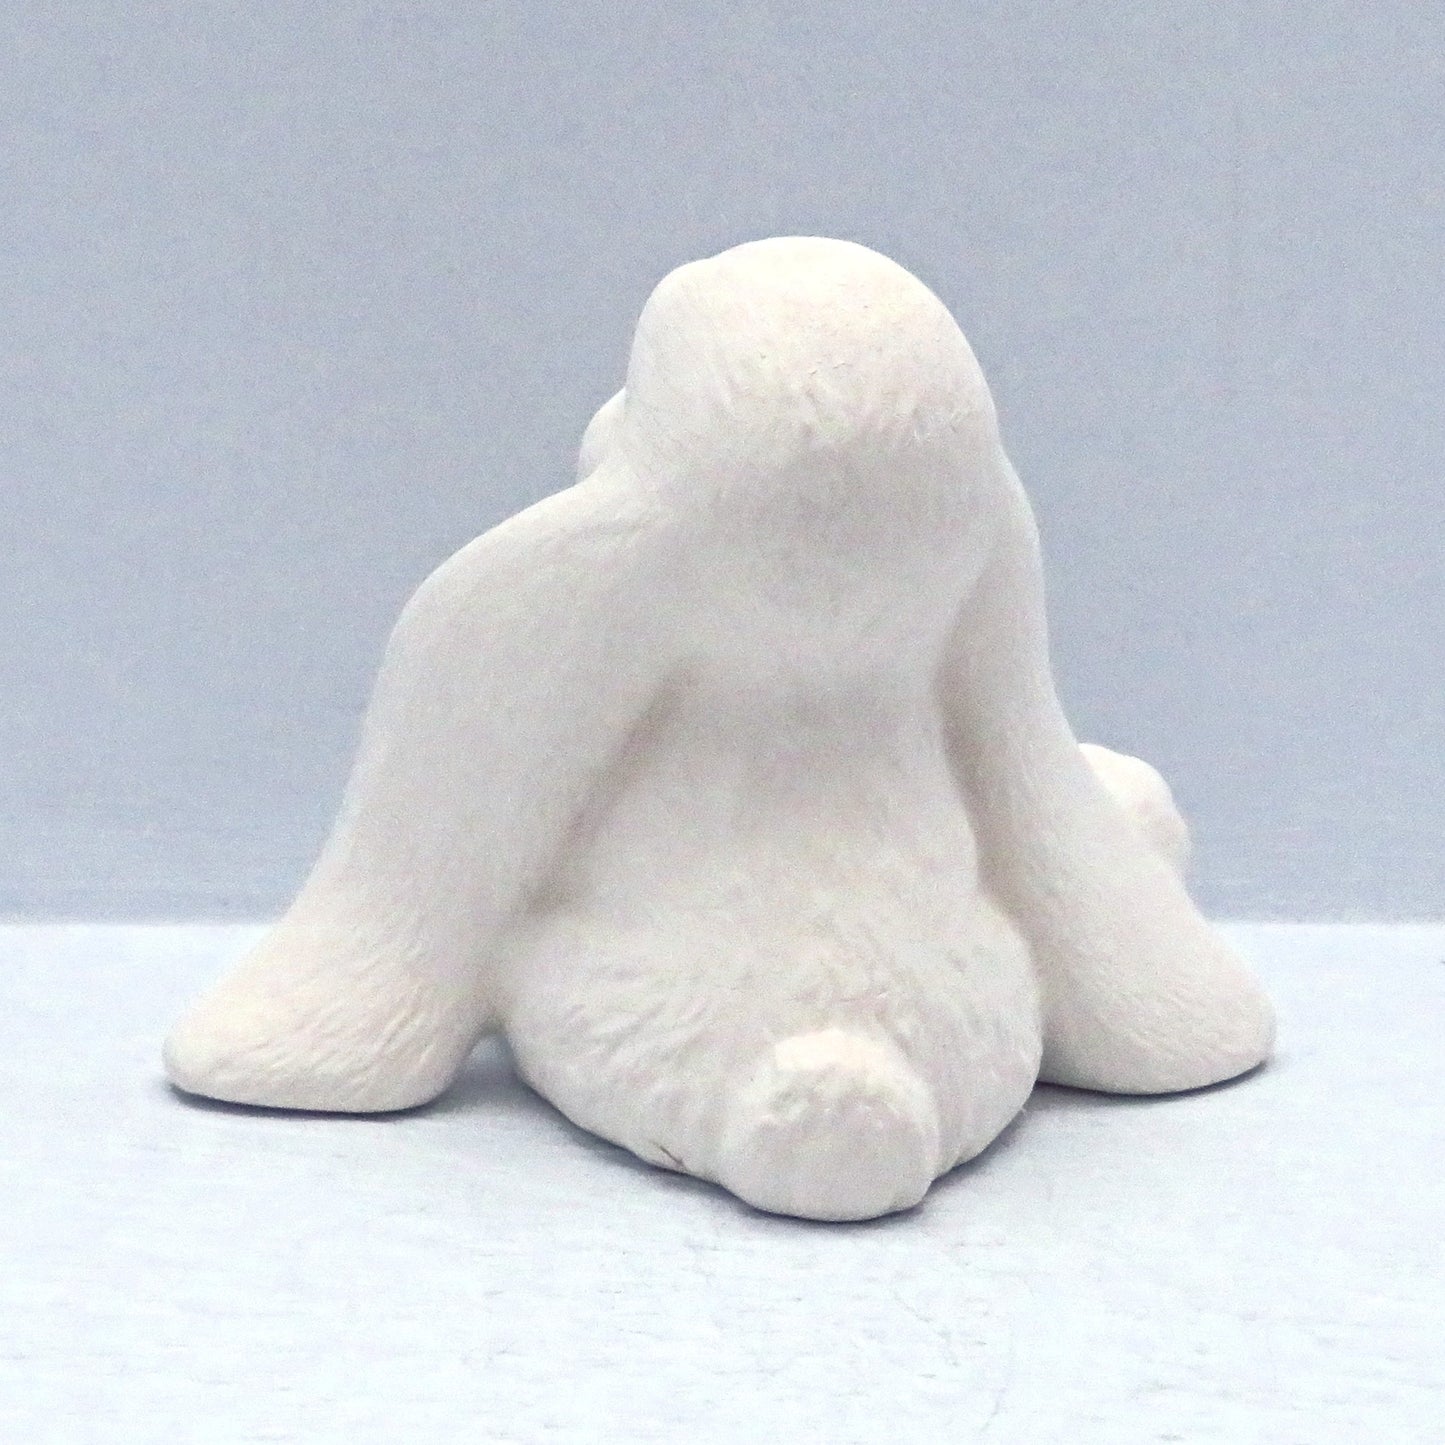 Back view of ready to paint lop eared bunny showing round tail, long ears sitting on a pale blue background.